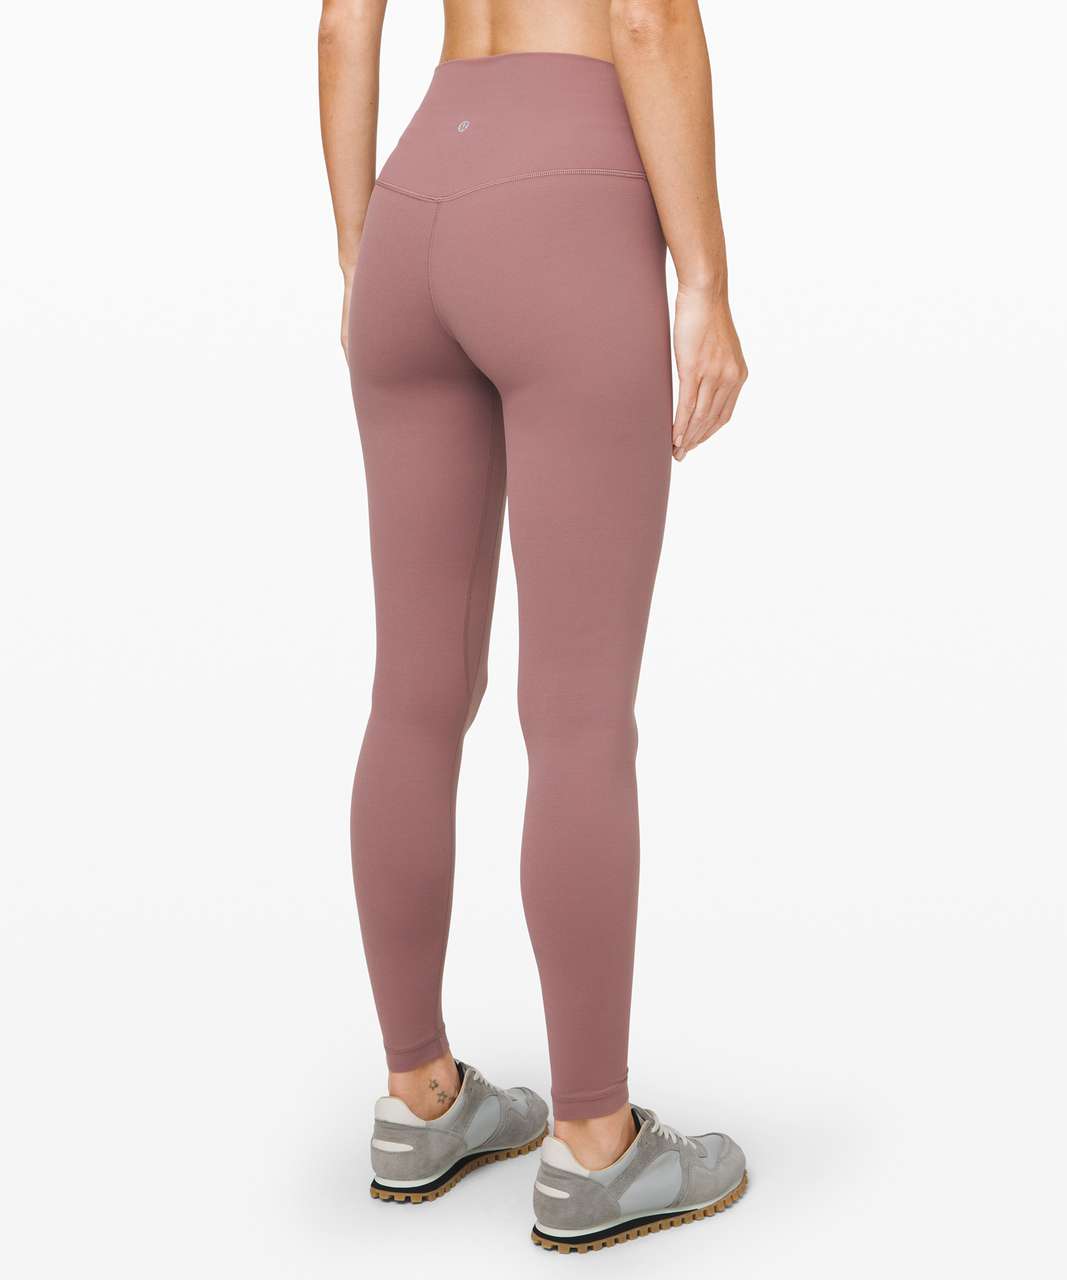 Replying to @rcmacnair the Align leggings from @lululemon are